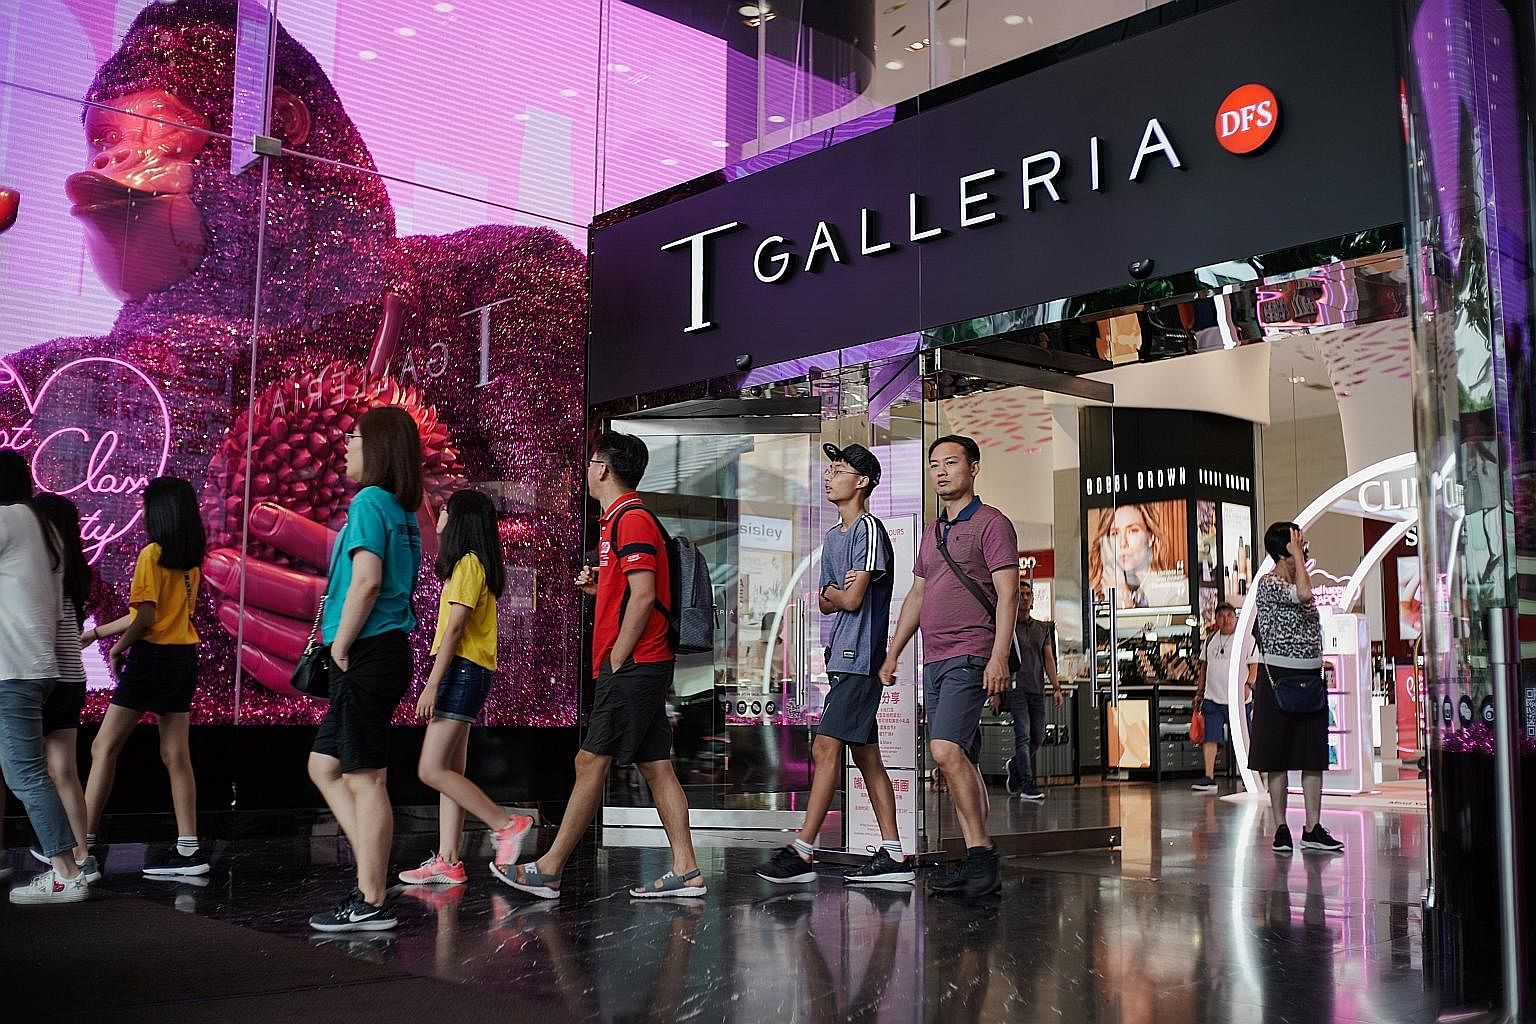 DFS Group, which has been selling liquor and tobacco at Changi Airport for 38 years, chose not to renew its lease in August, although its luxury concessions such as T Galleria by DFS Singapore in Scotts Road (above) will continue. Beauty retailer Sas